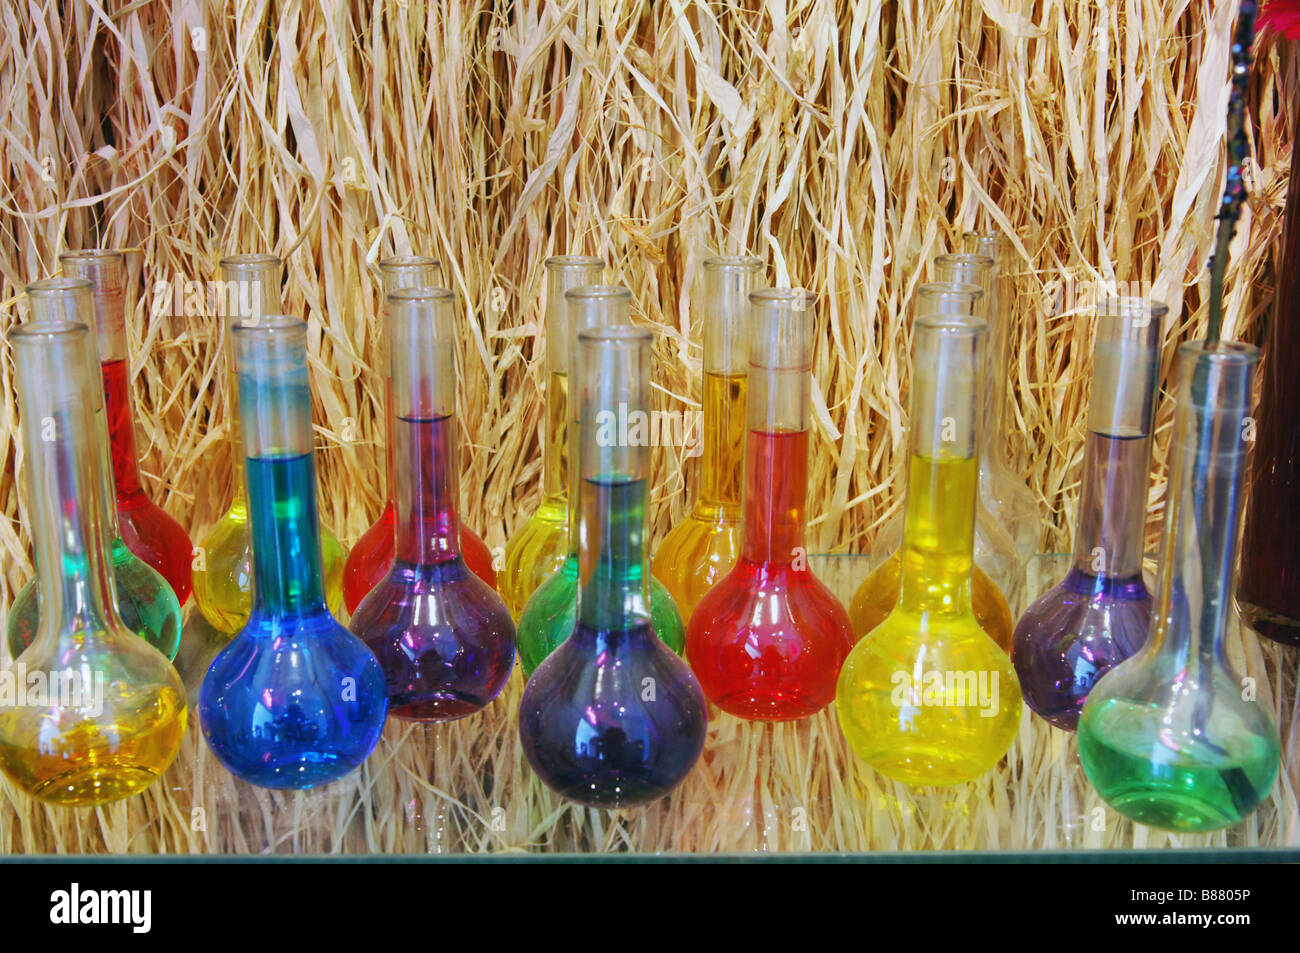 Test tubes filled with coloured colored water and a background of straw. Stock Photo